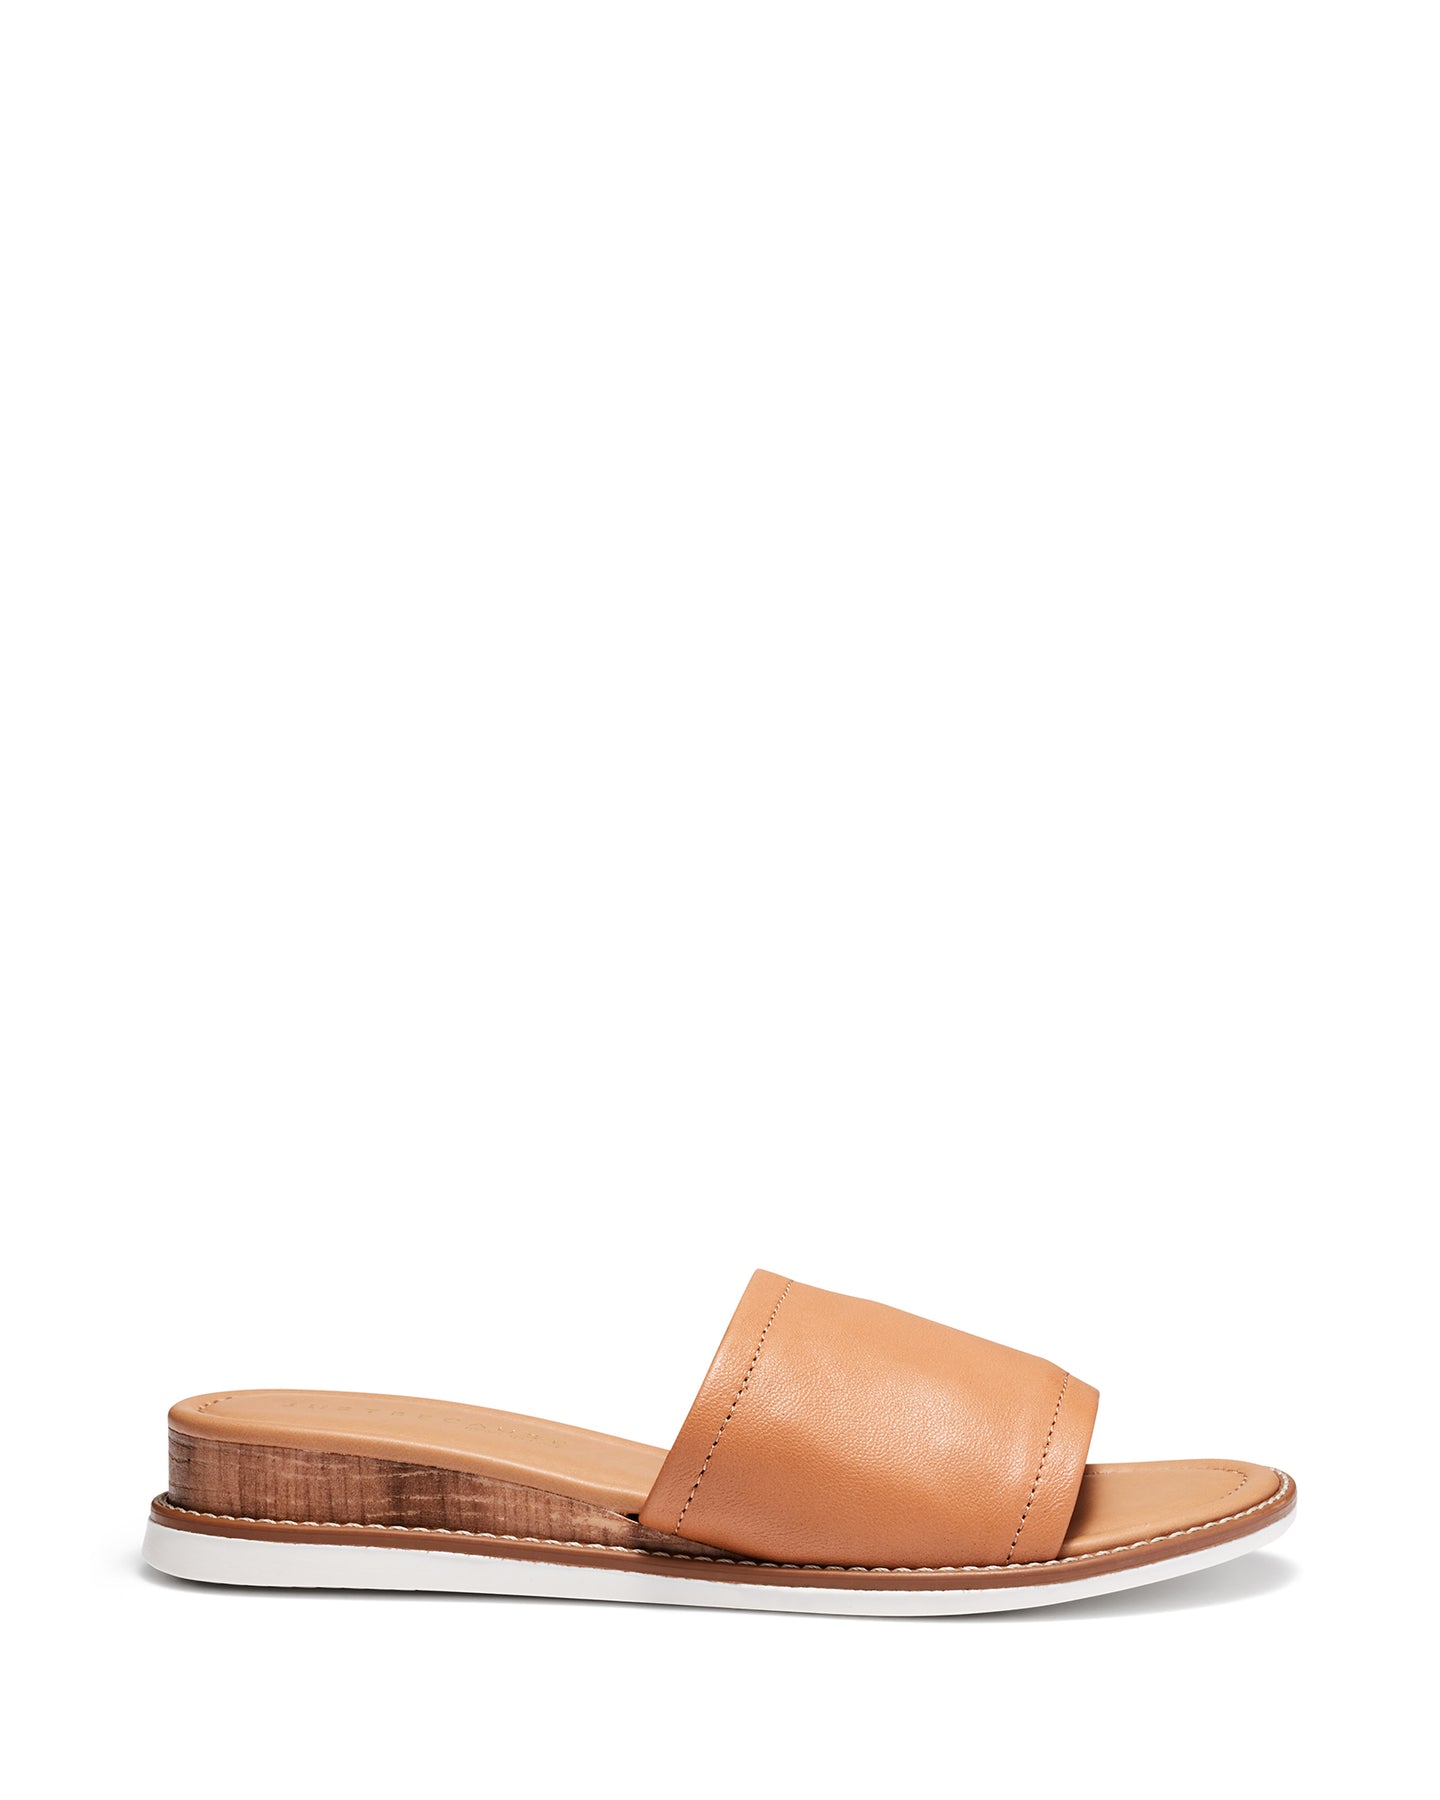 Just Because Shoes Flora Honey | Leather Sandals | Slides | Wedges